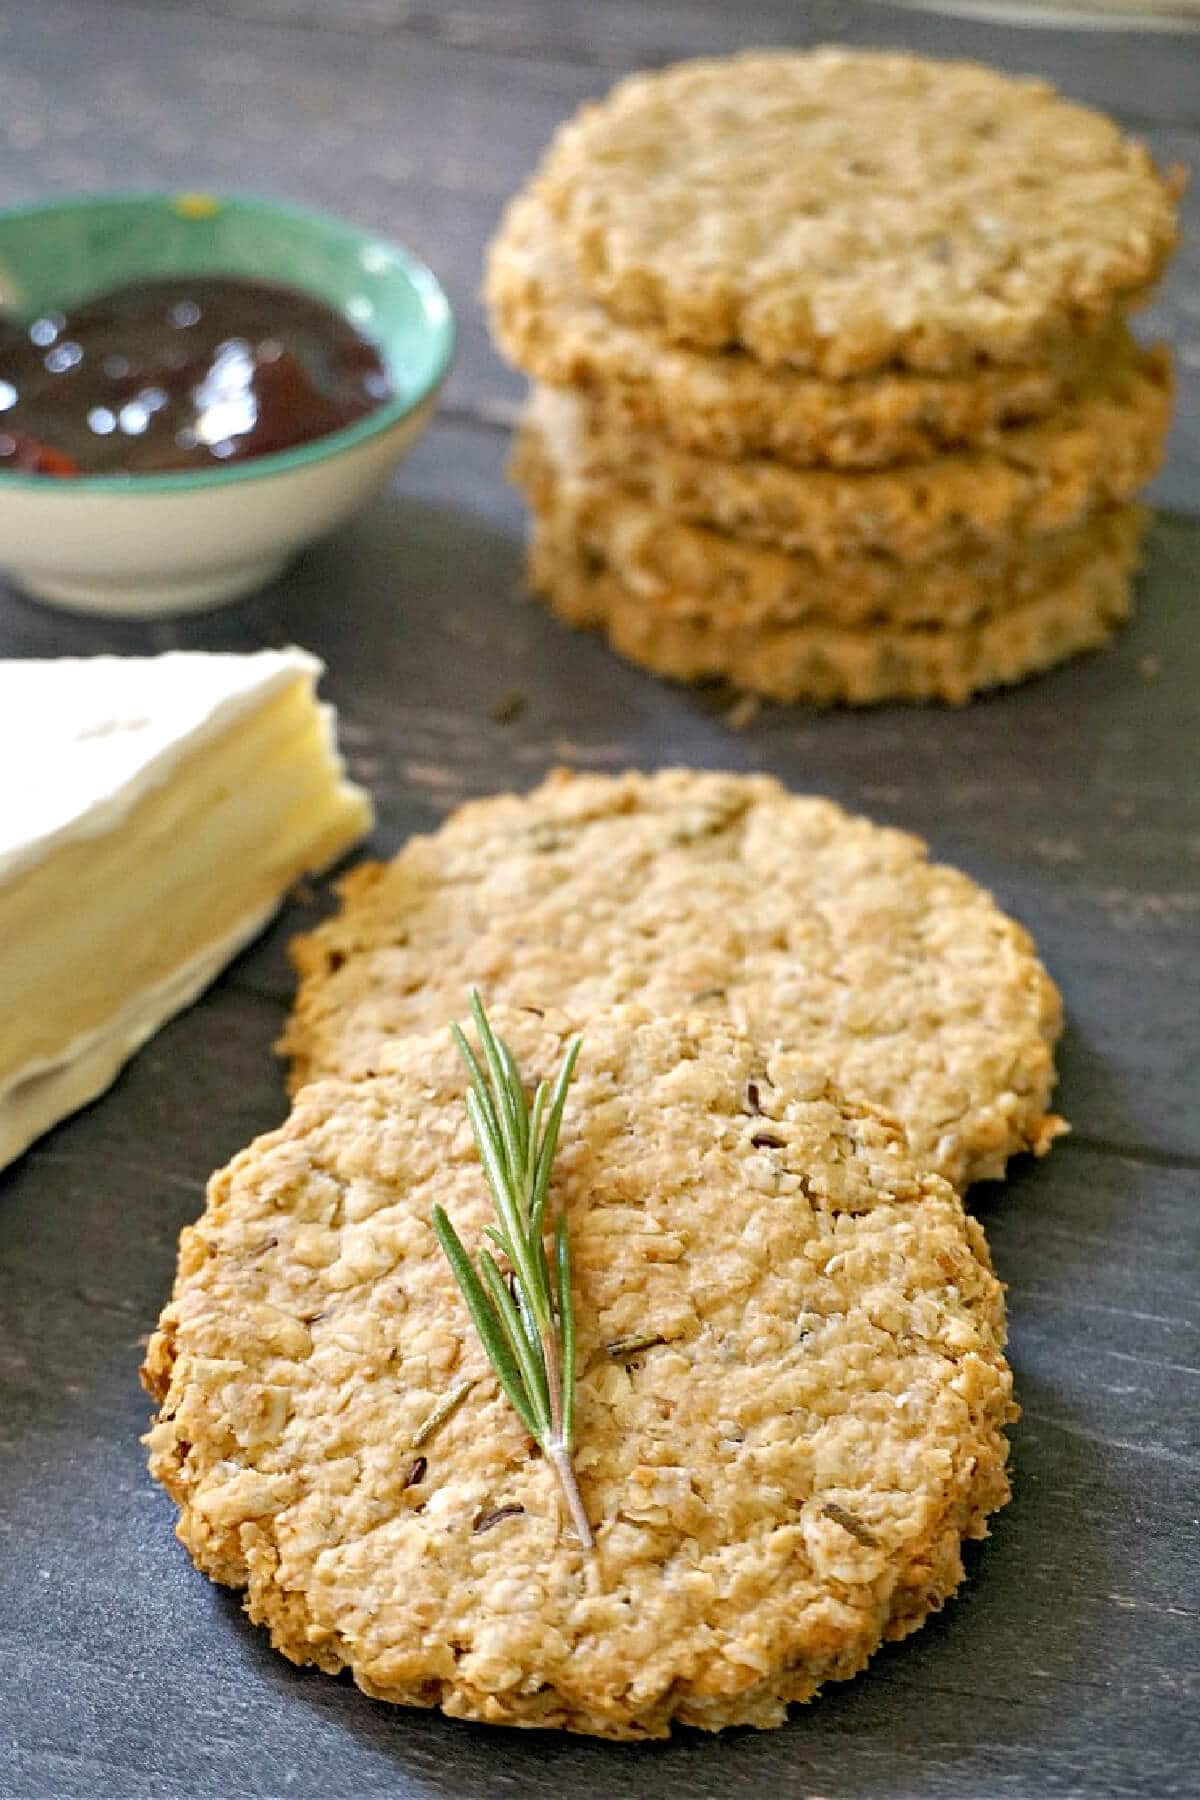 2 oat biscuits with a stack of more biscuits in the background.